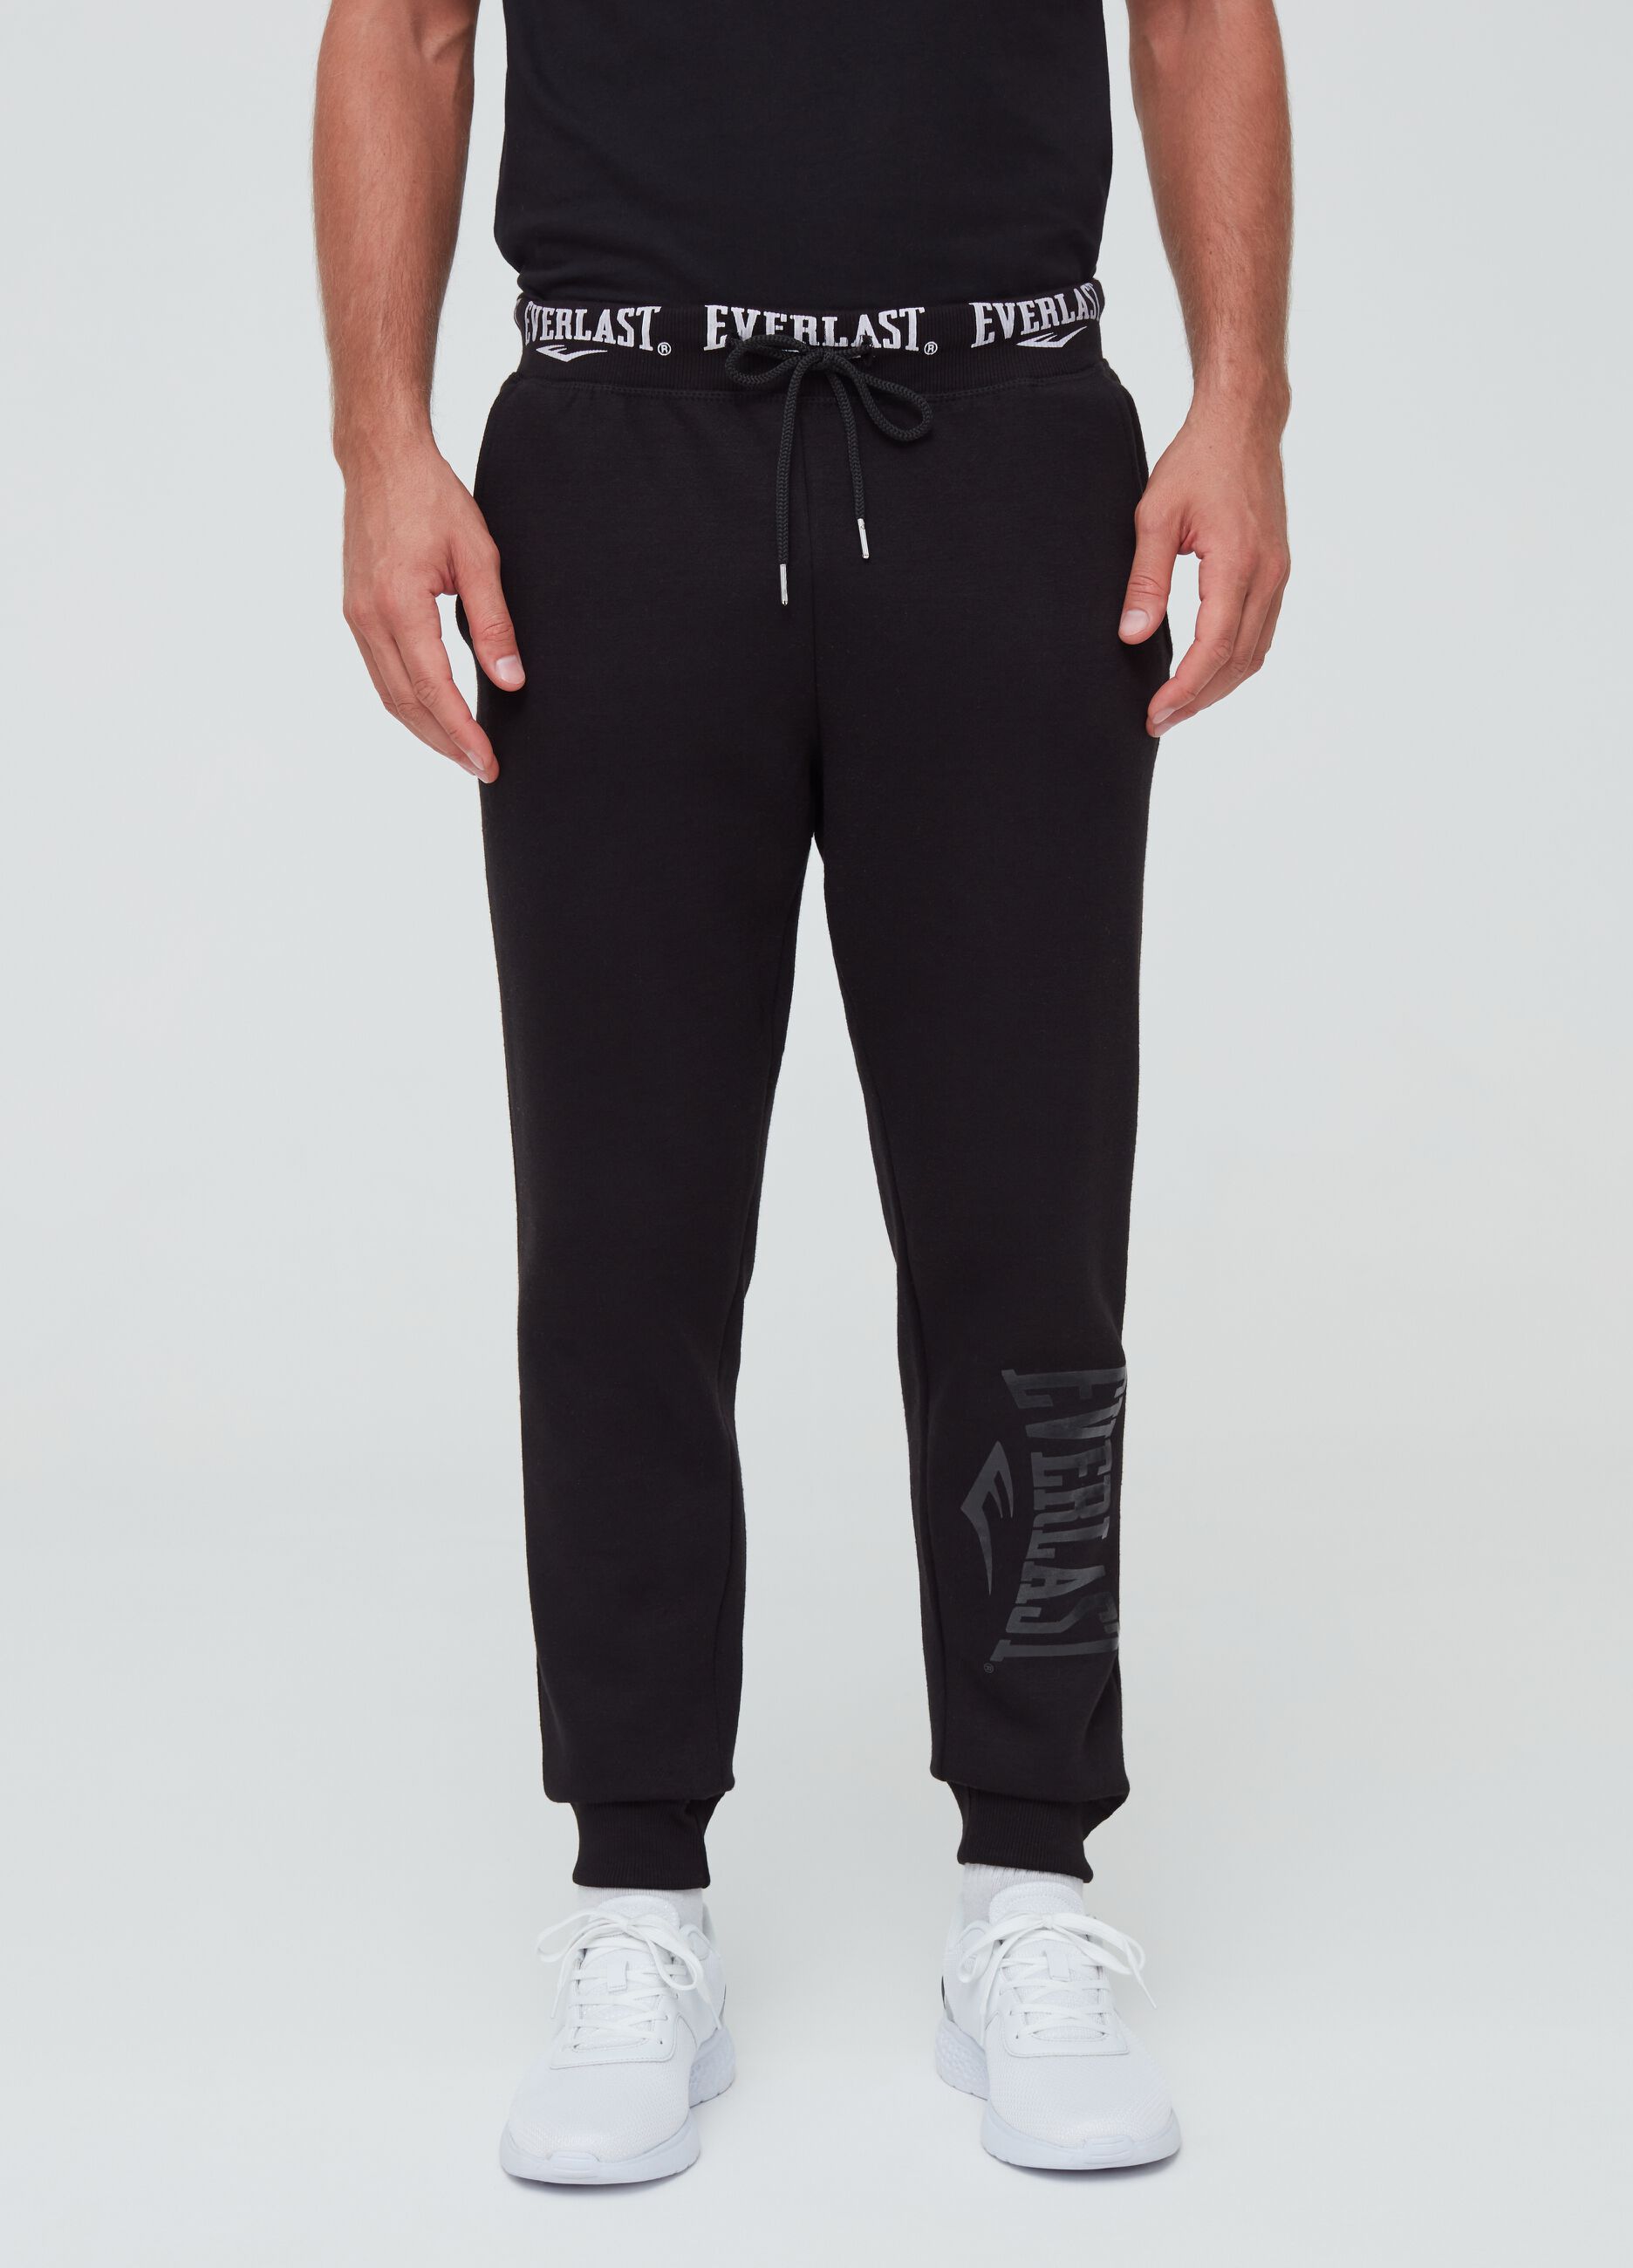 Solid colour joggers with Everlast print